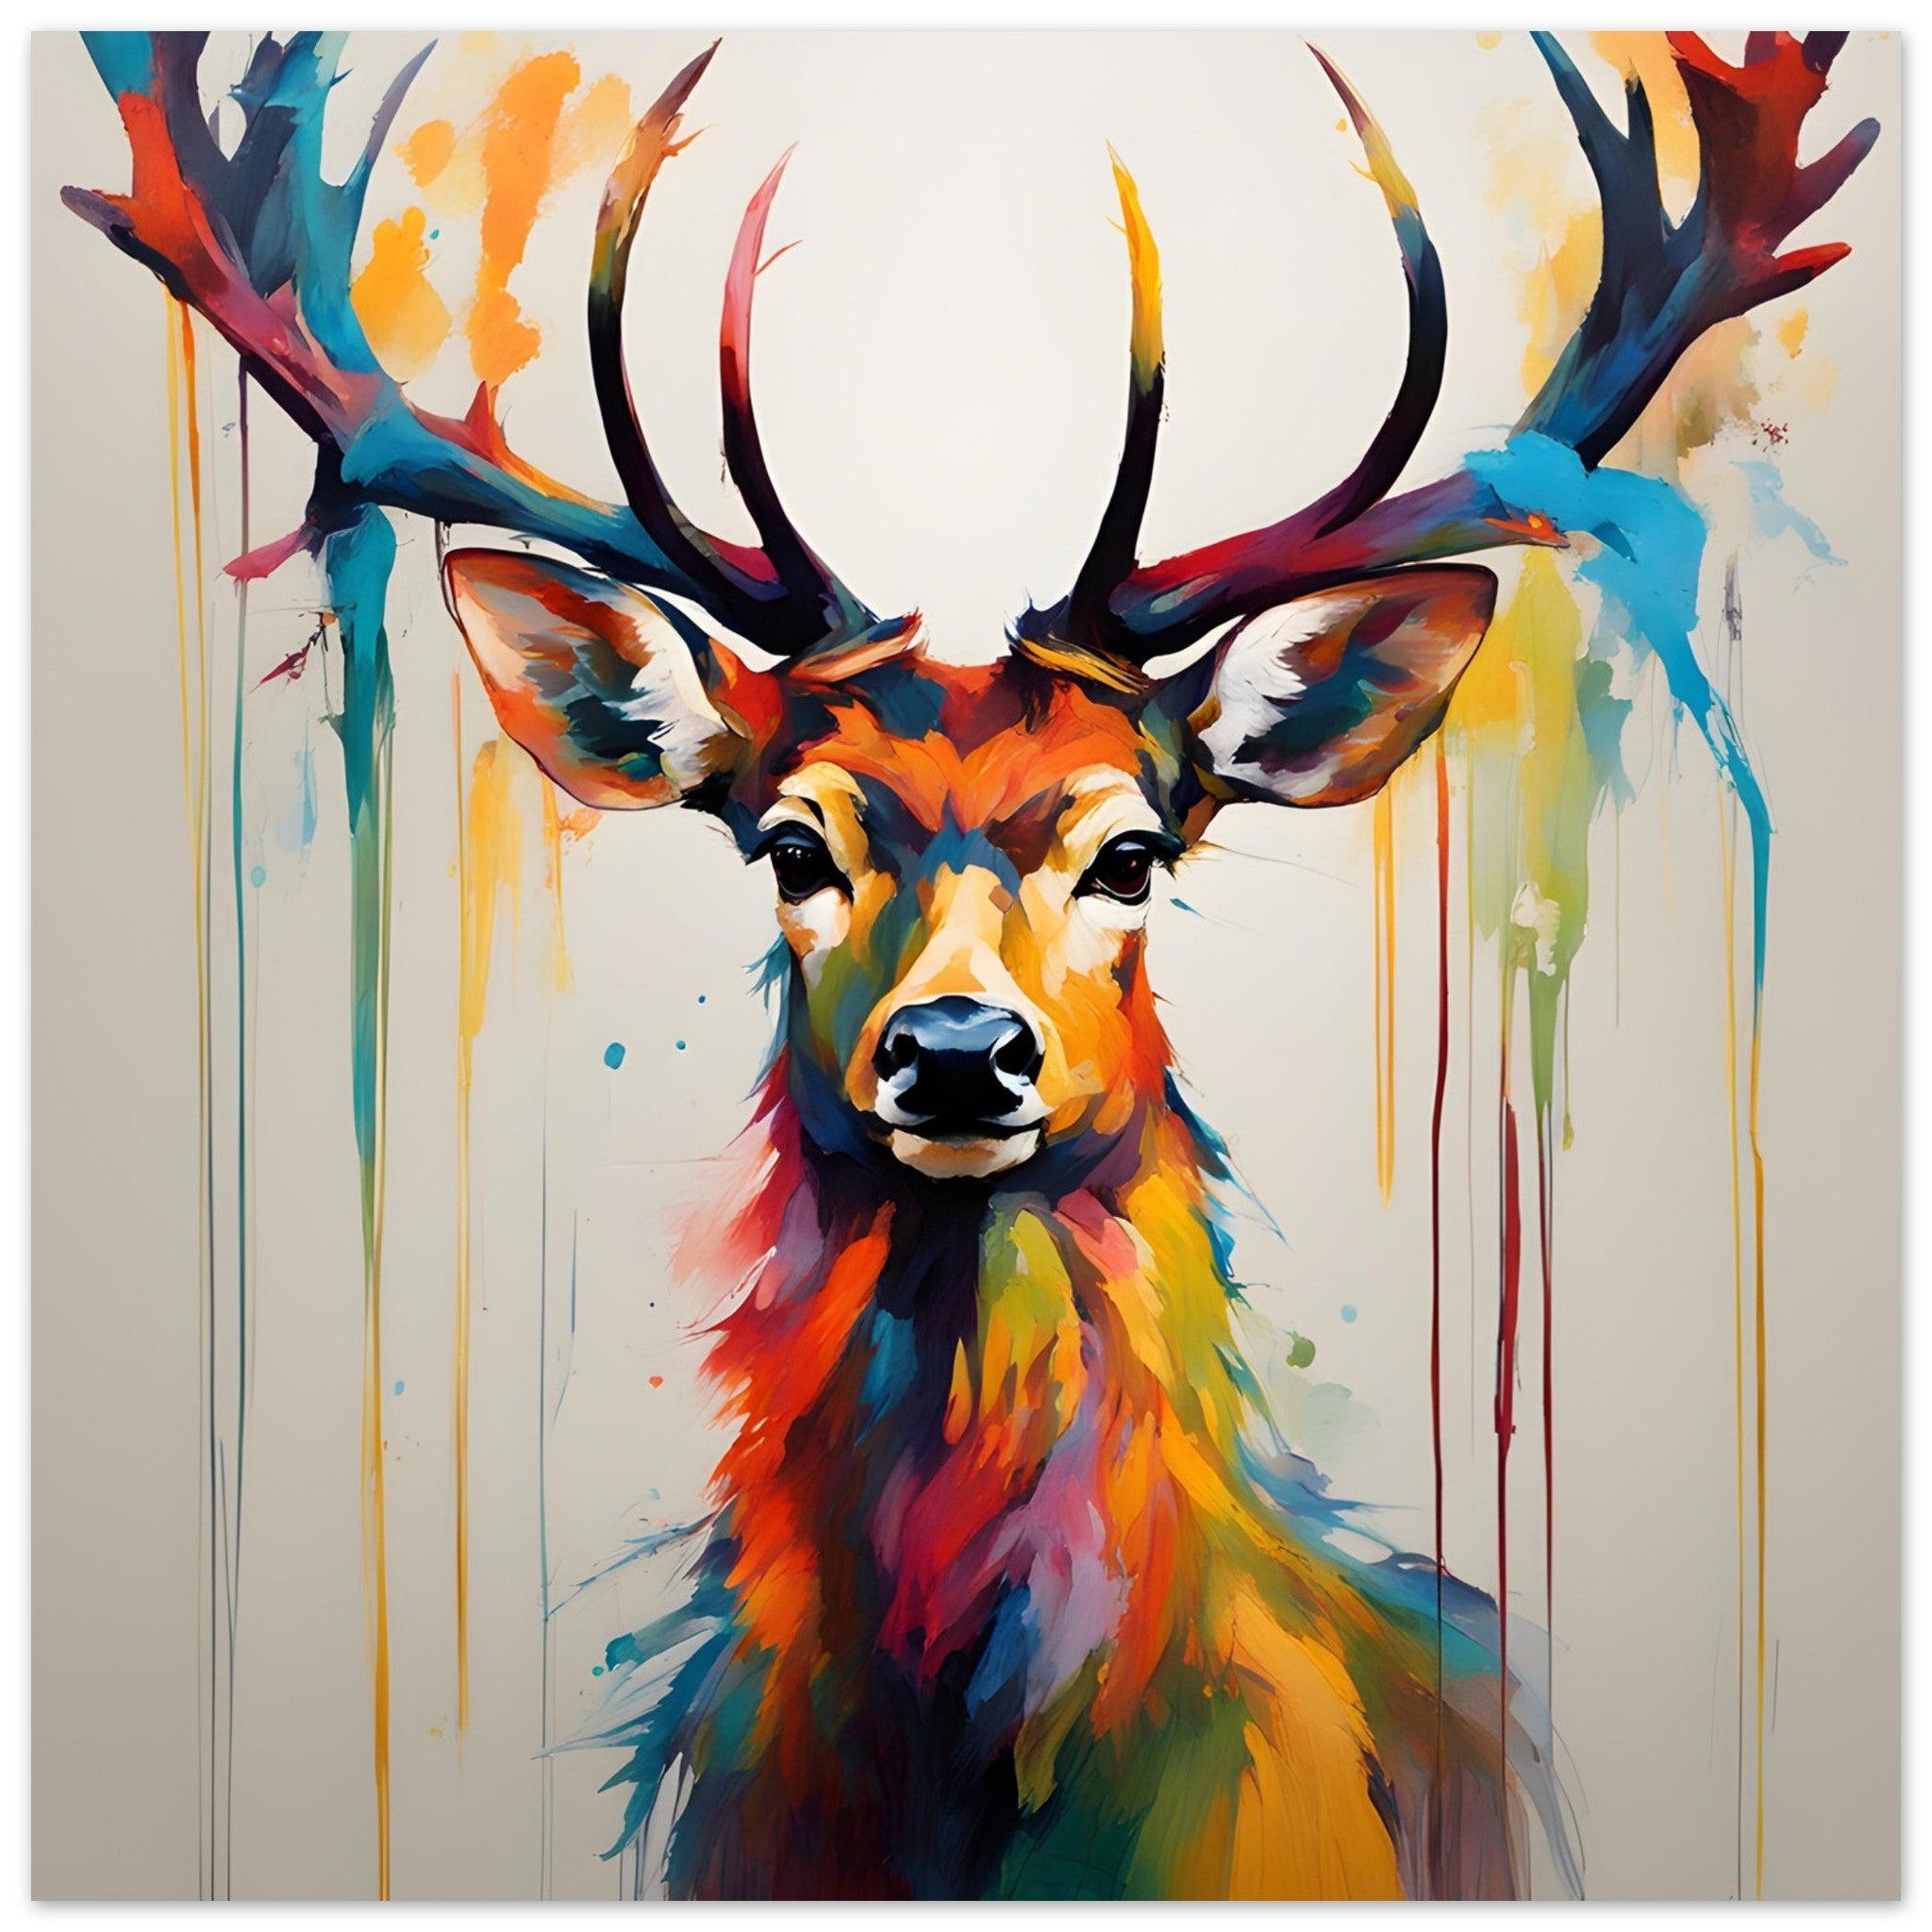 Stag With Colourful Antlers By Reflectapix - wall art, home decor, kitchen art, wall decor, wall murals, wall prints, room decor, artwork prints, wall artwork, art to print, art on wall